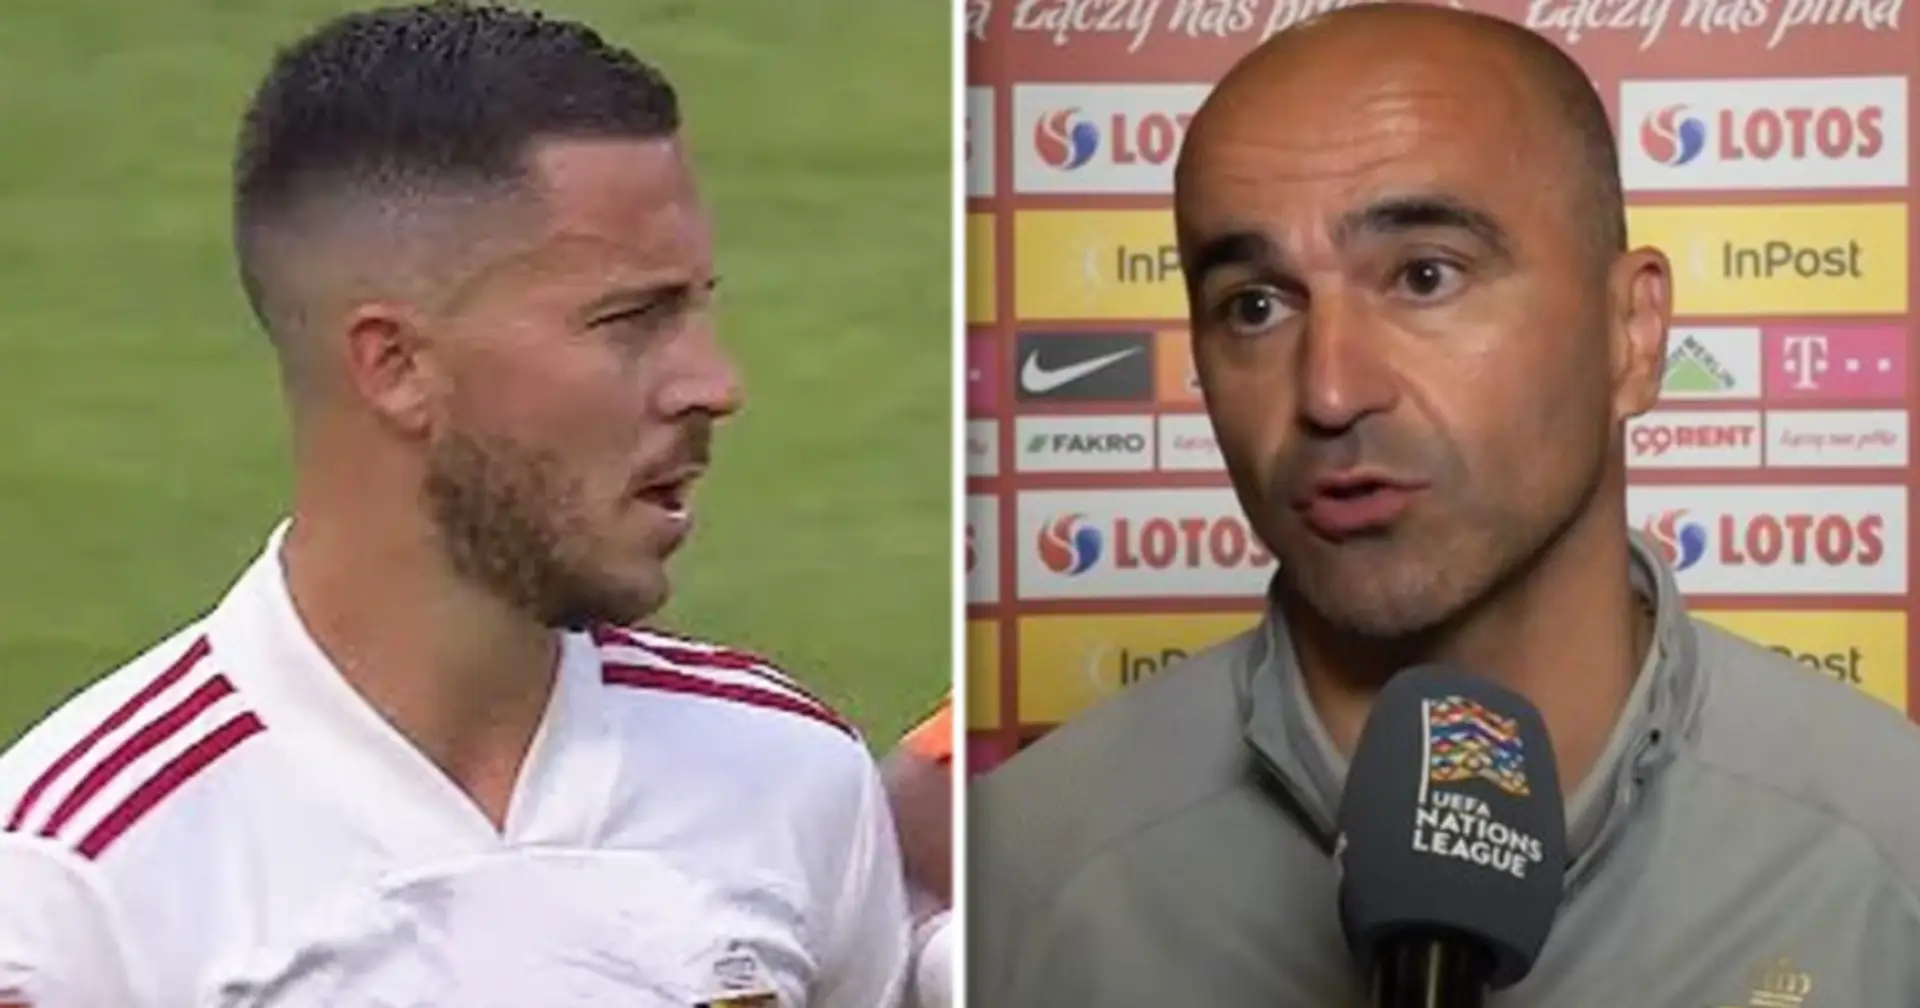 Belgium NT coach explains why Real Madrid fans will see 'totally different' Hazard next season